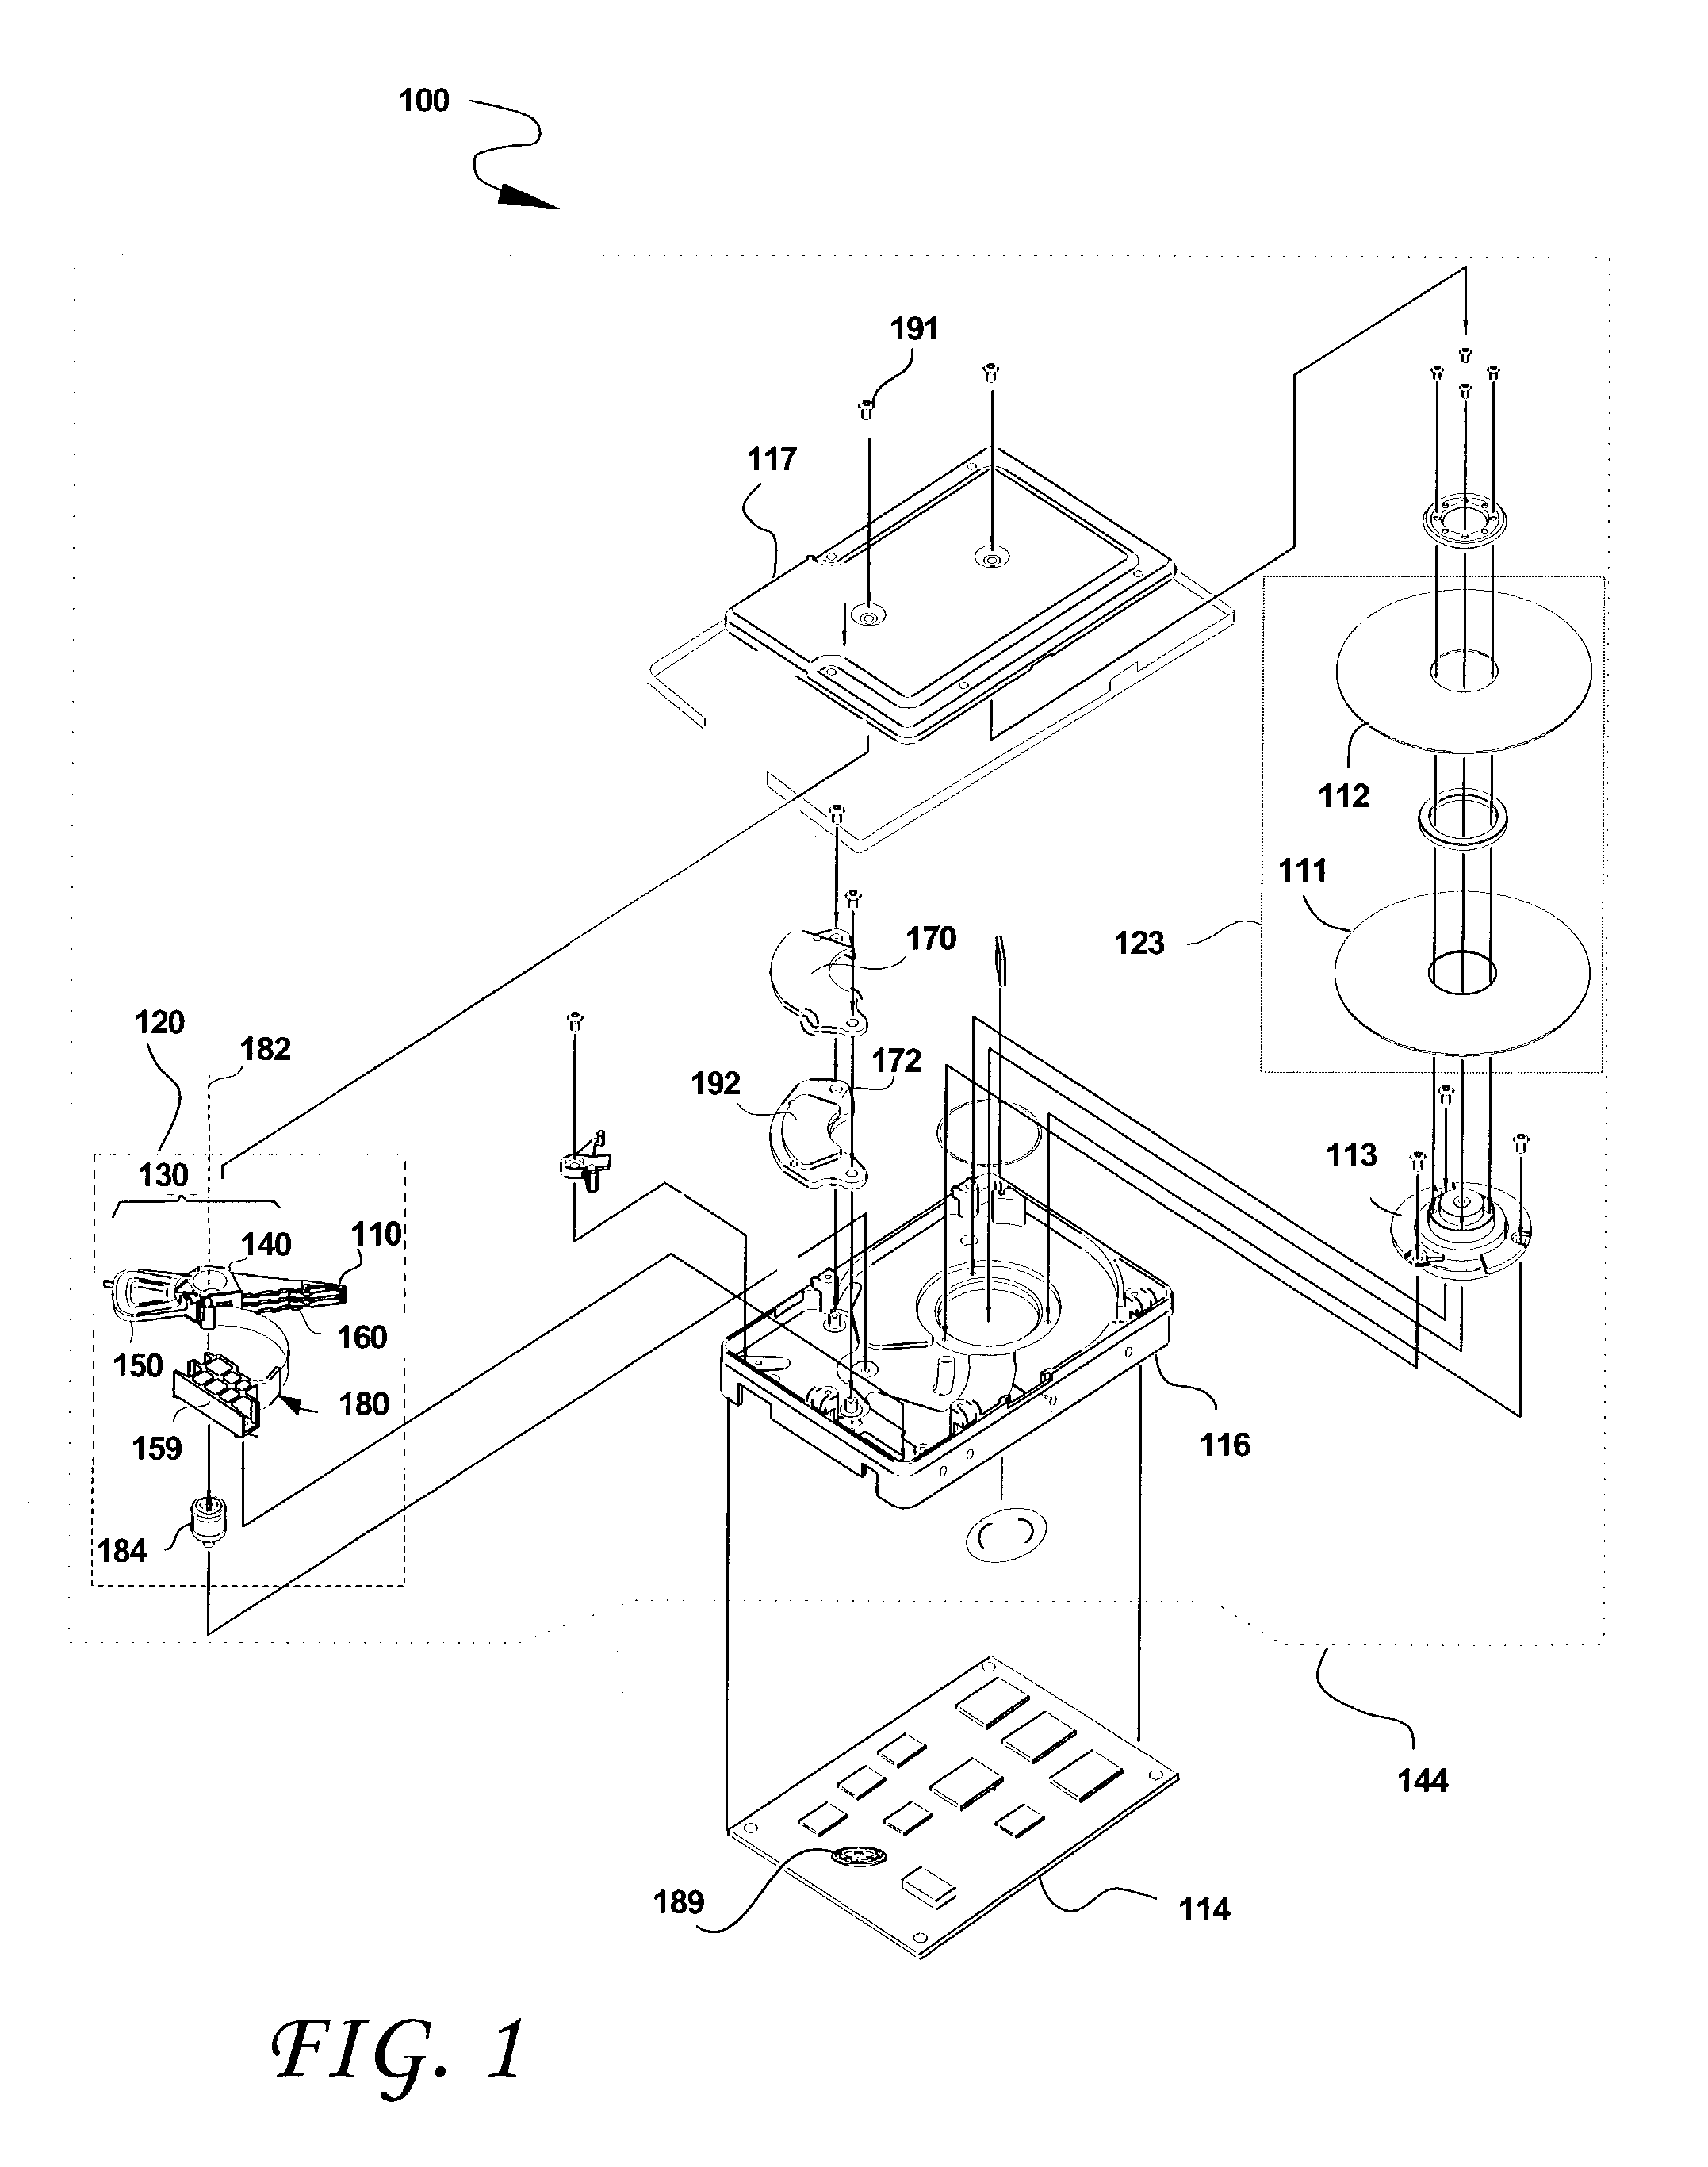 Disk drives and host devices including a resetable shock sensor